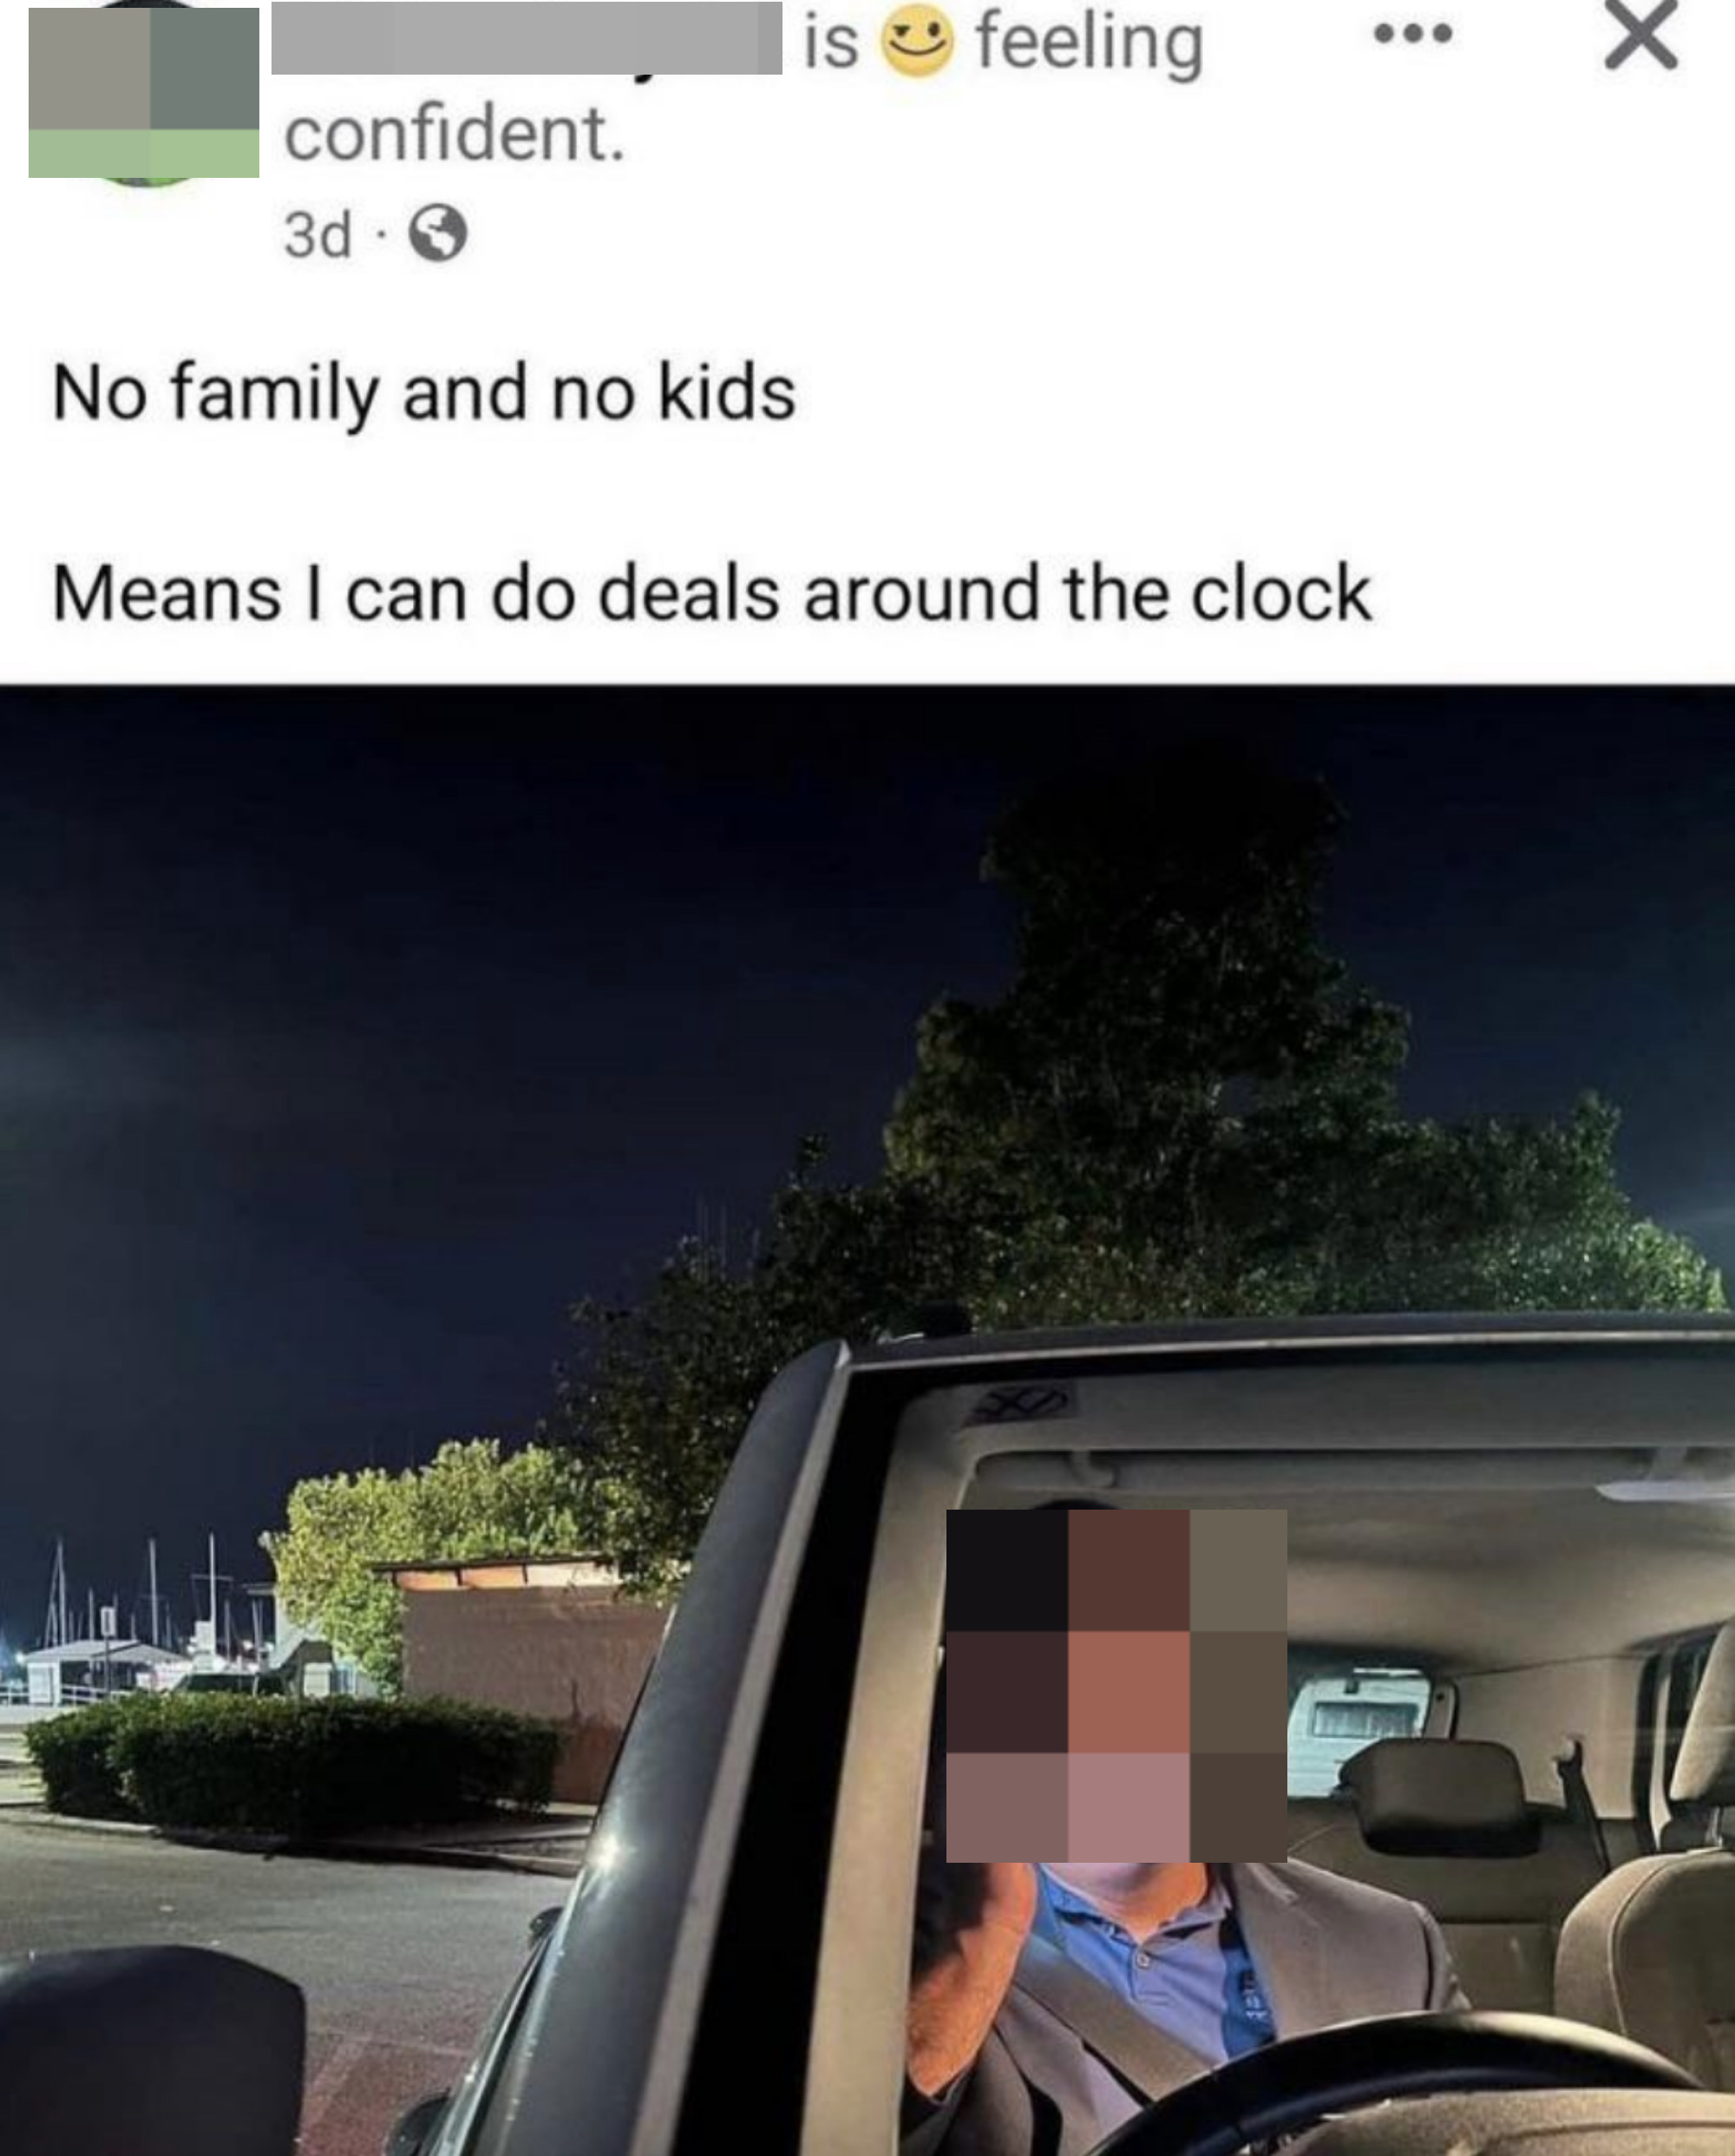 Someone bragging that not having kids means they can work &#x27;around the clock.&#x27;